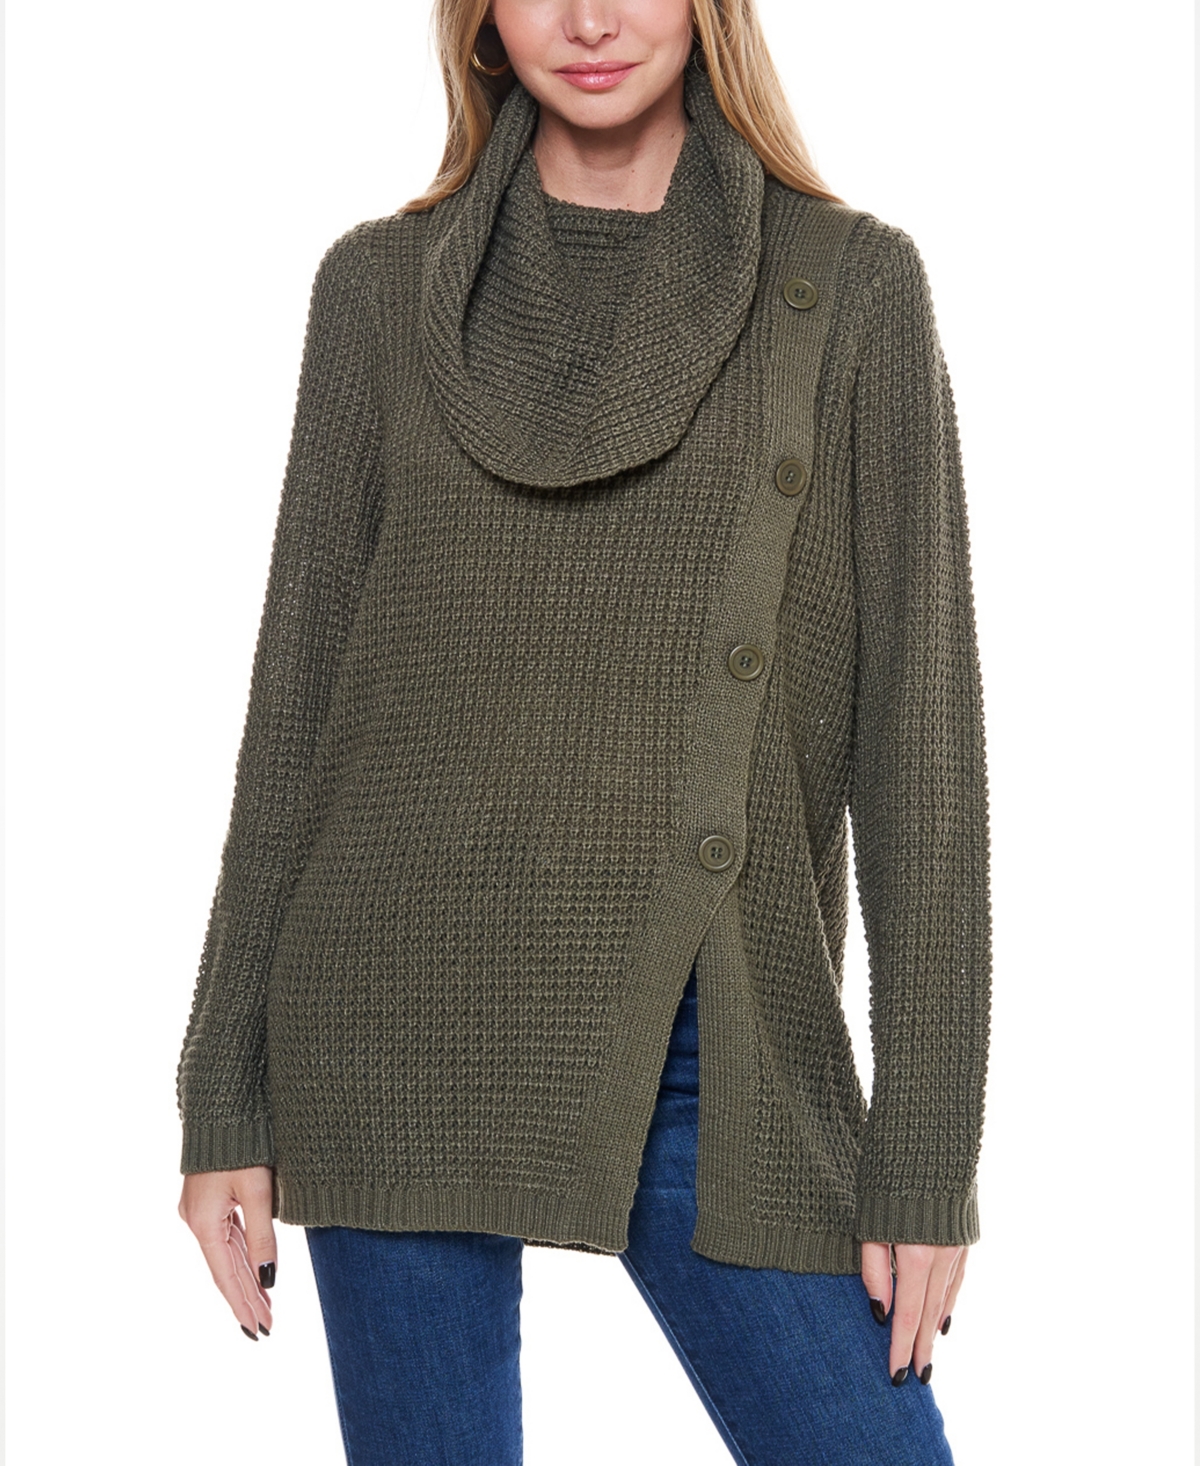 Women's Waffle Knit Cowl Neck Sweater with Buttons - Olive